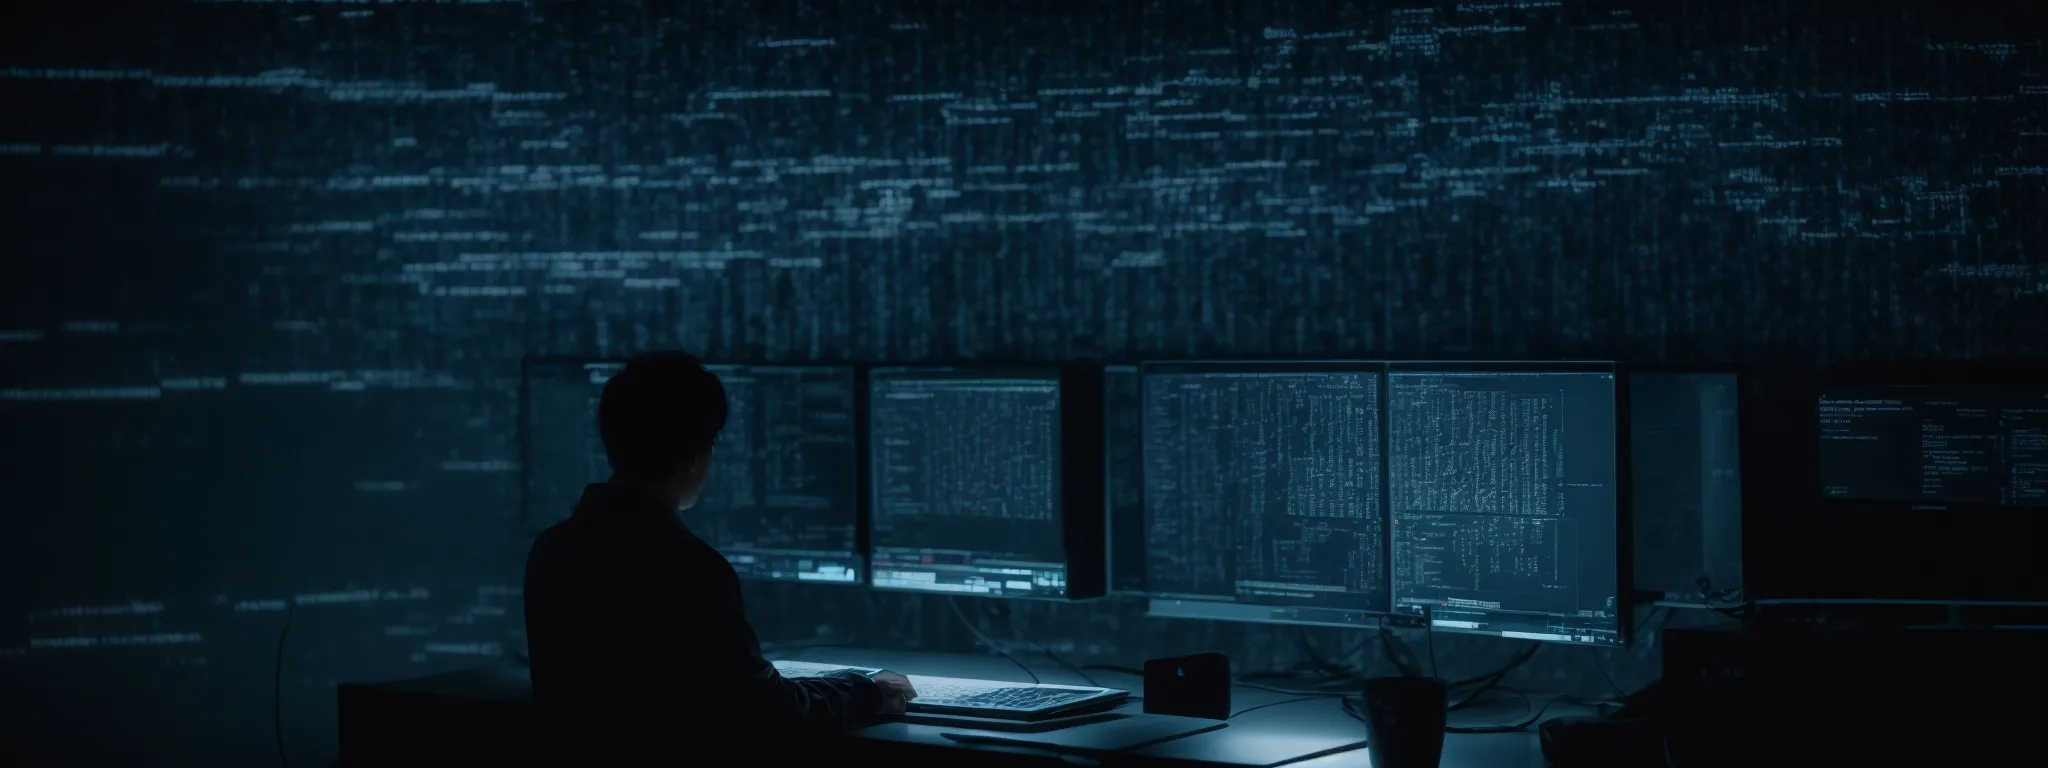 a dimly lit room with a shadowy figure typing on a computer, surrounded by a web of interconnected screens displaying chaotic lines of code.